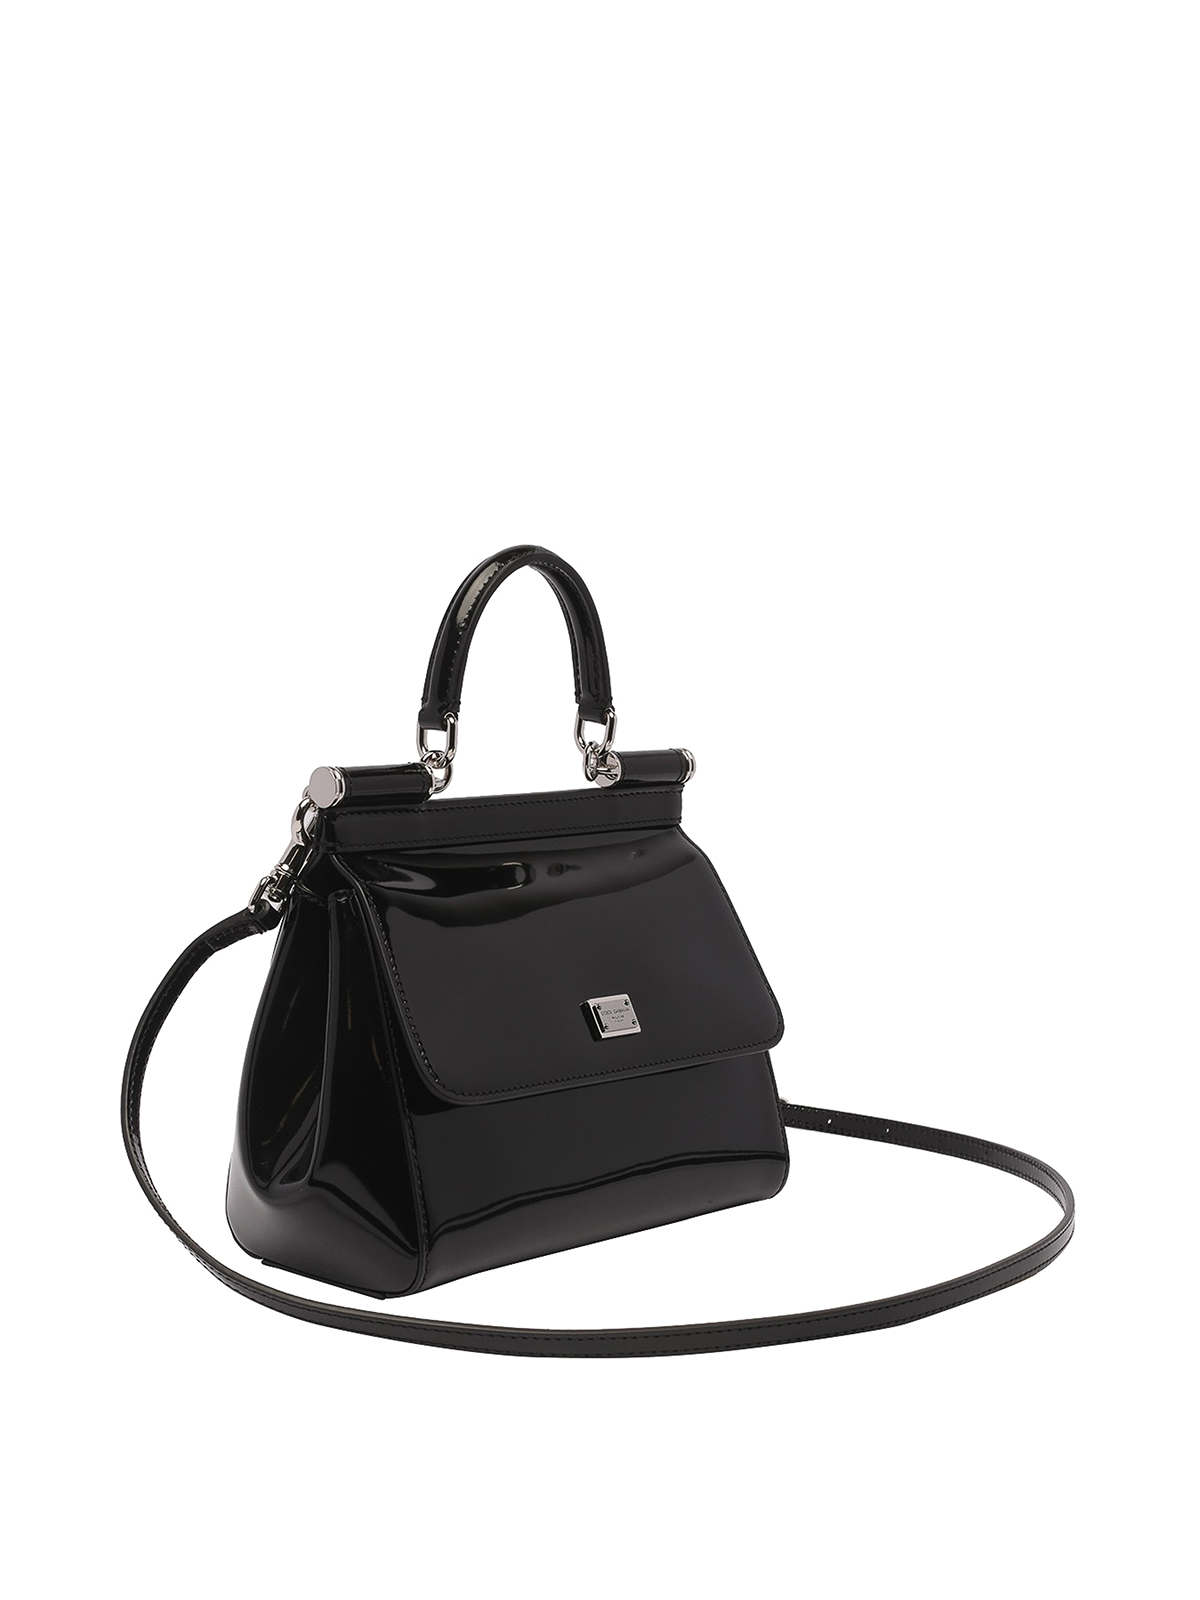 Cross body bags Dolce & Gabbana - Patent leather Sicily bag